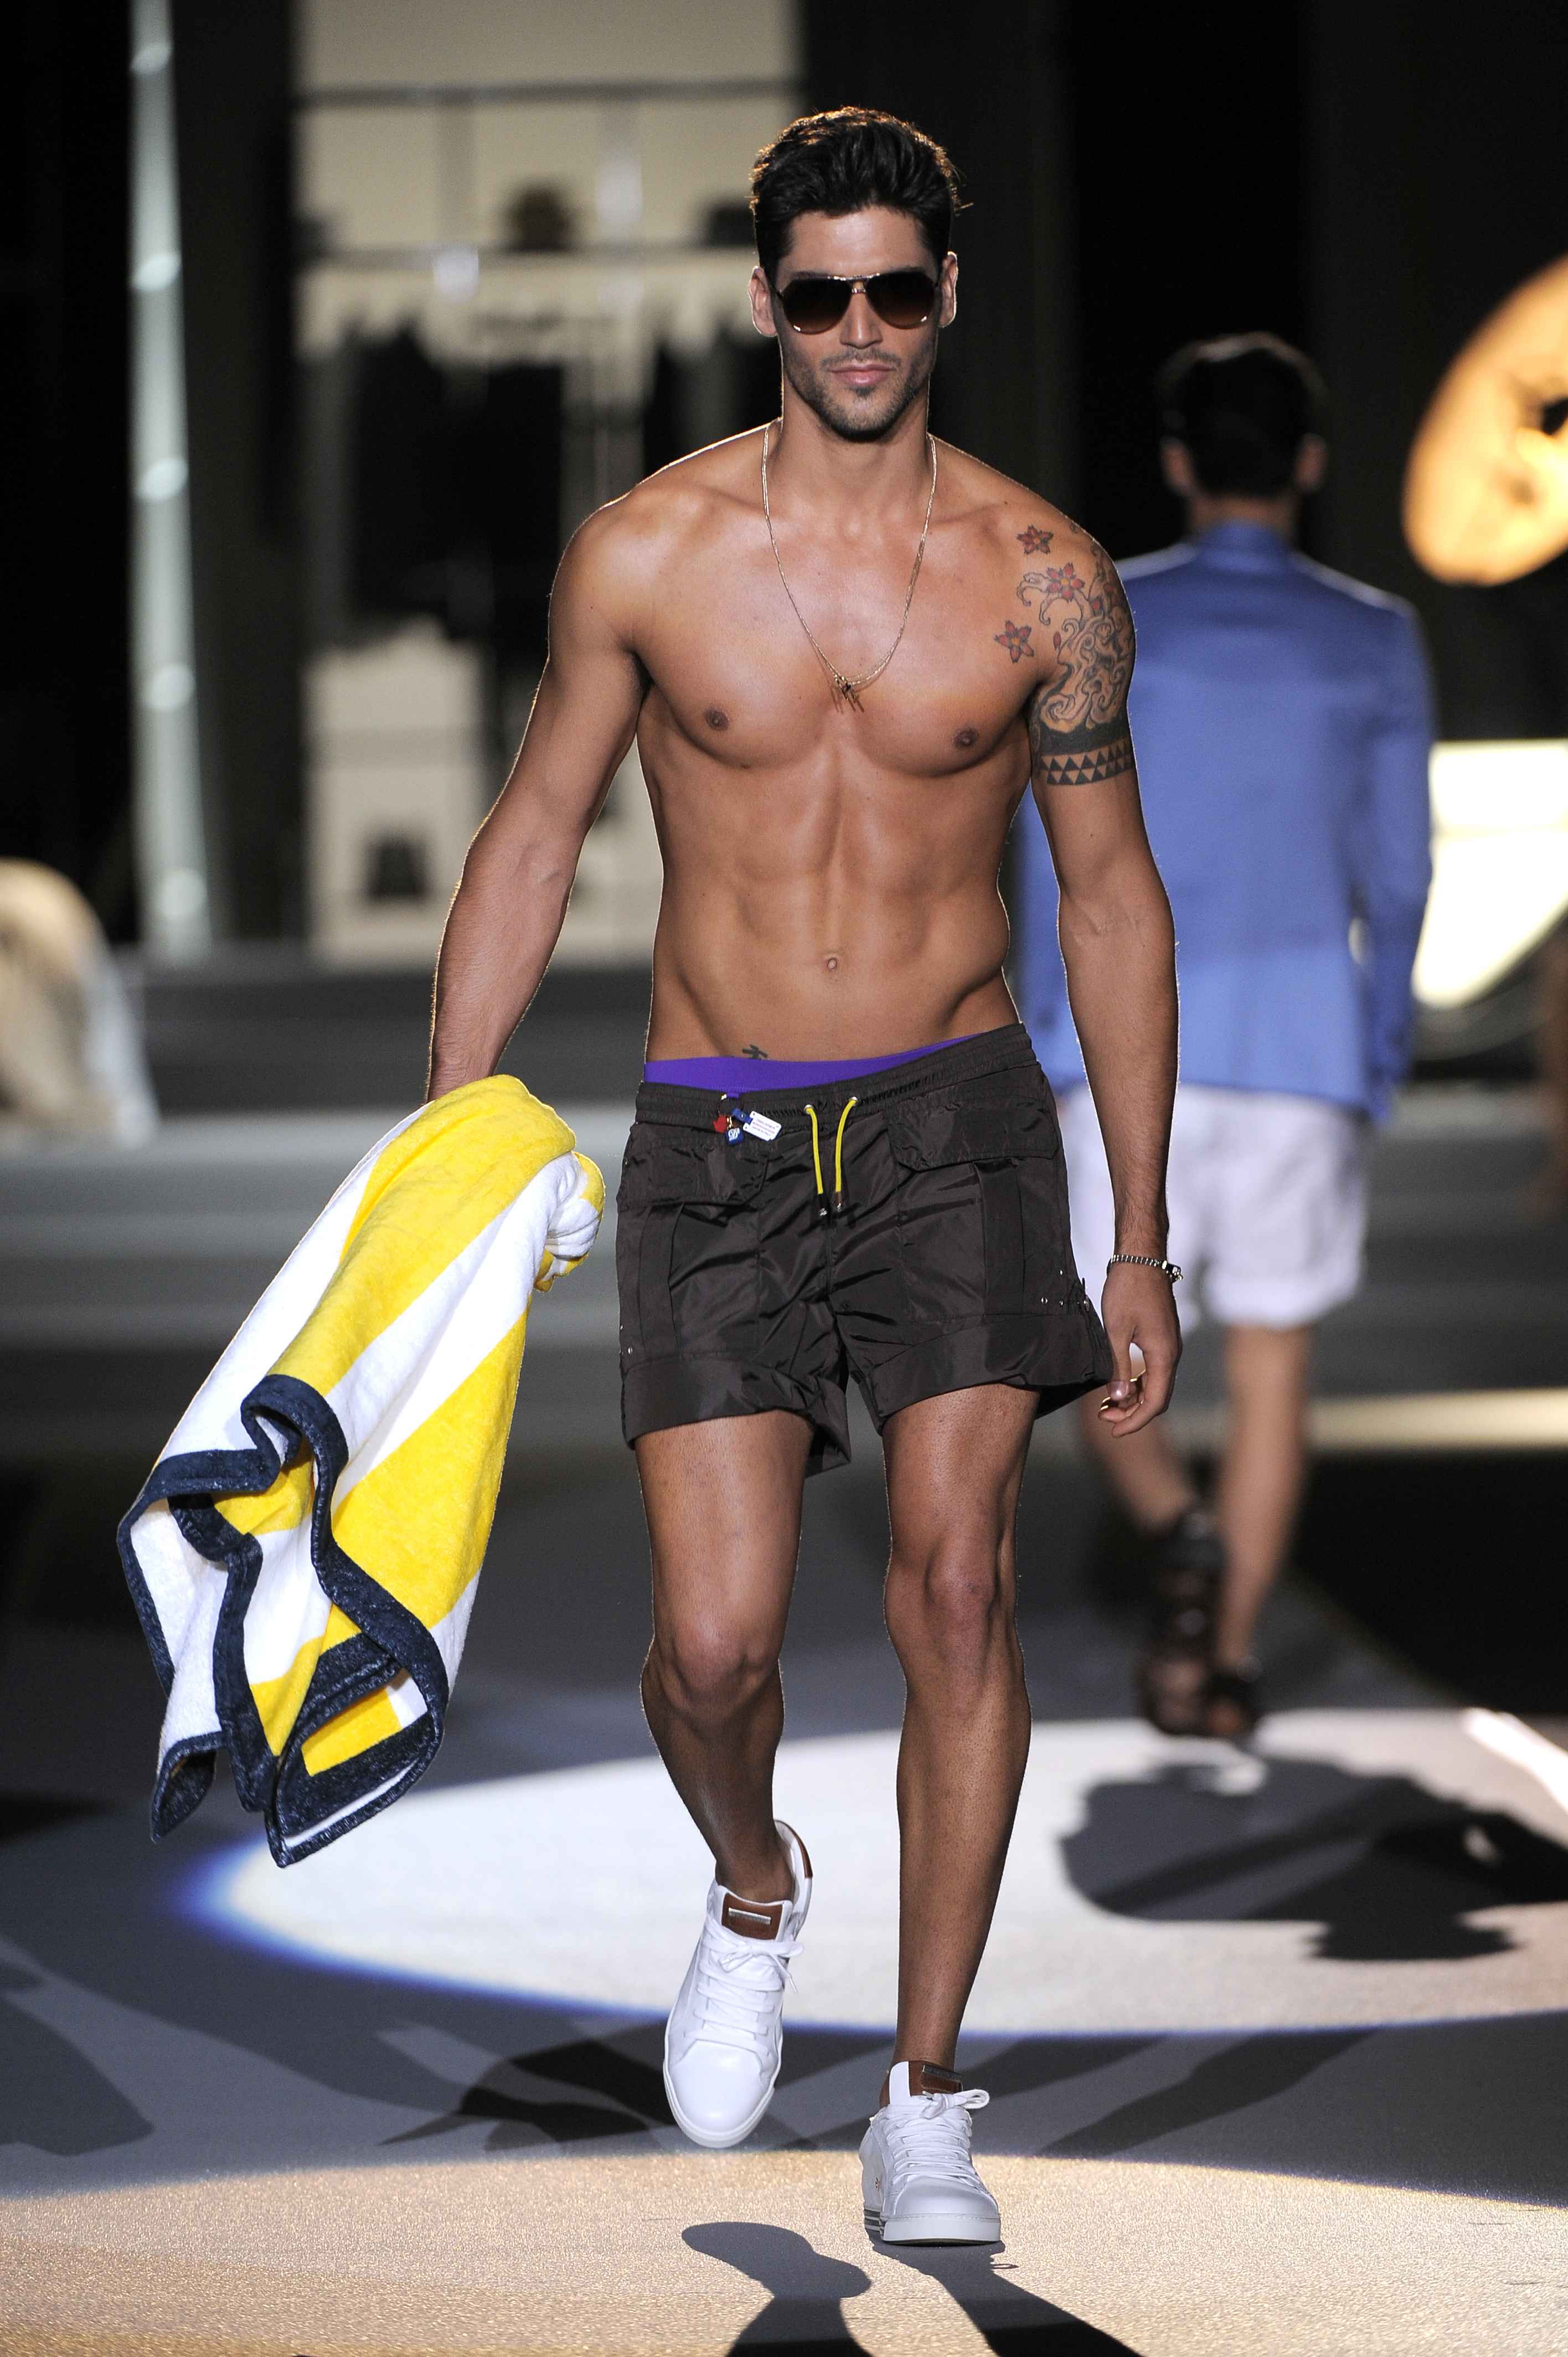 maillot dsquared